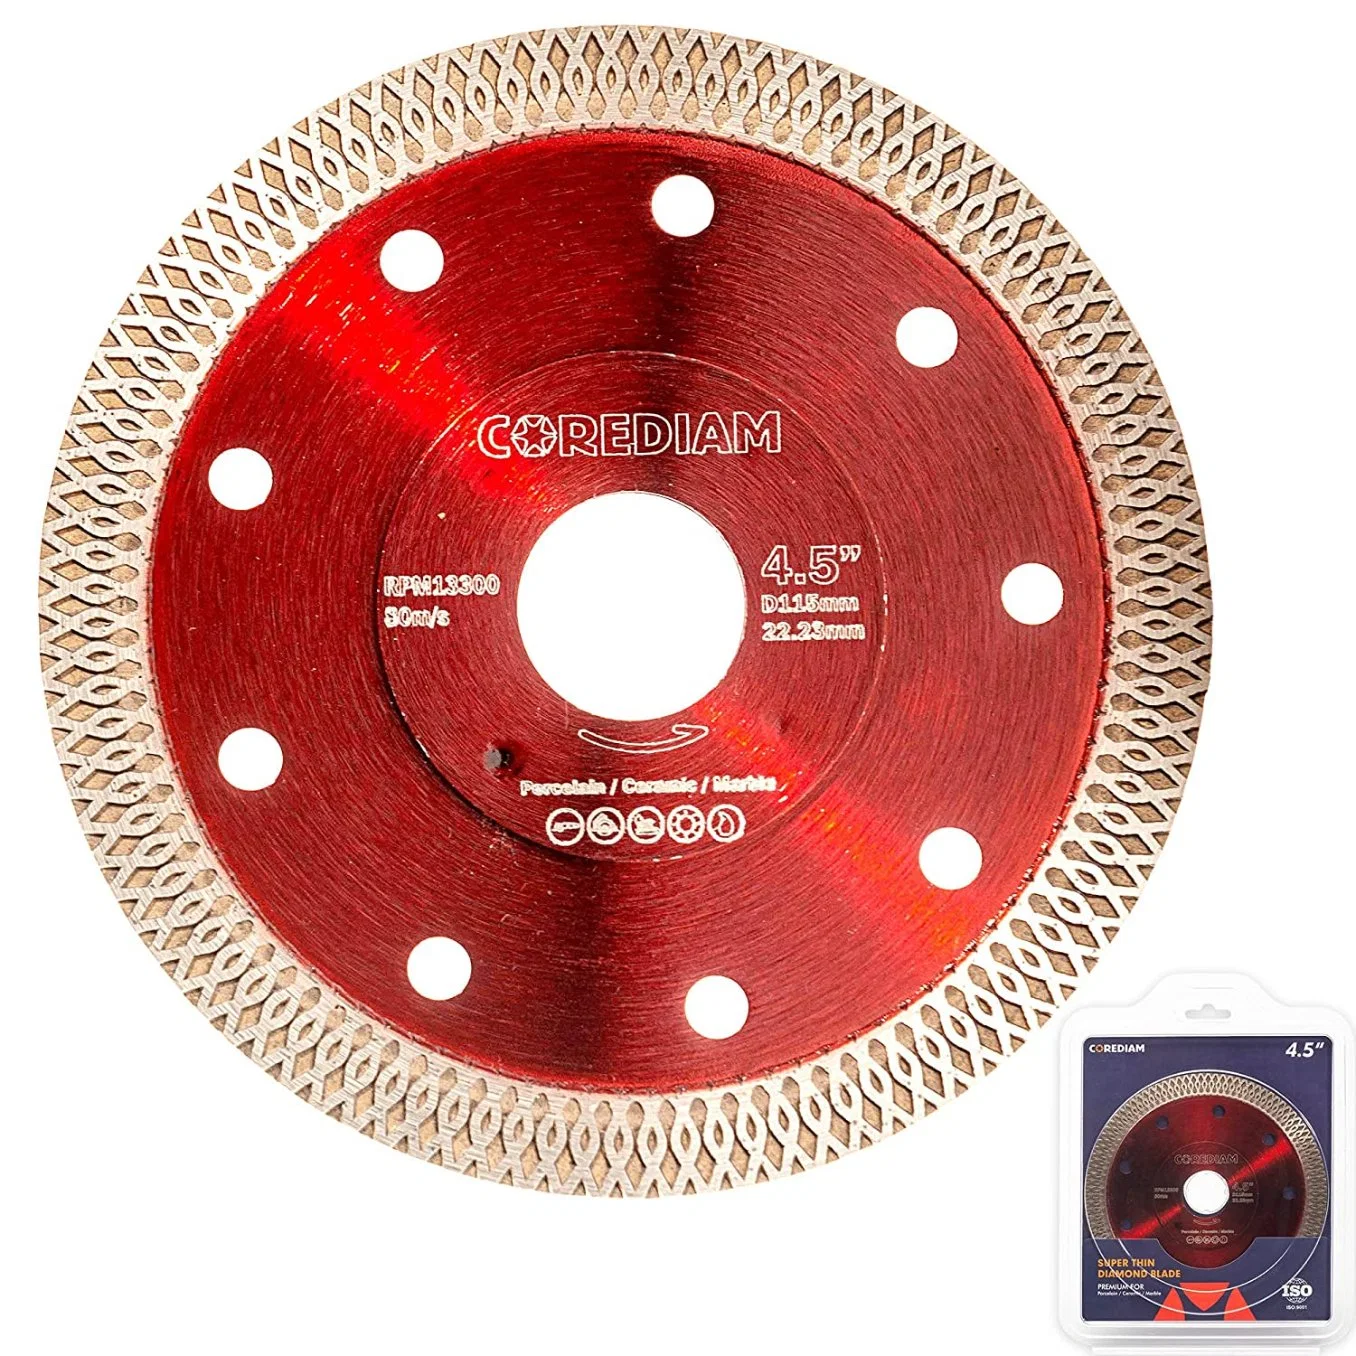 115mm Super Thin Mesh Turbo Diamond Porcelain Saw Blade From Made in China/Cutting Tools